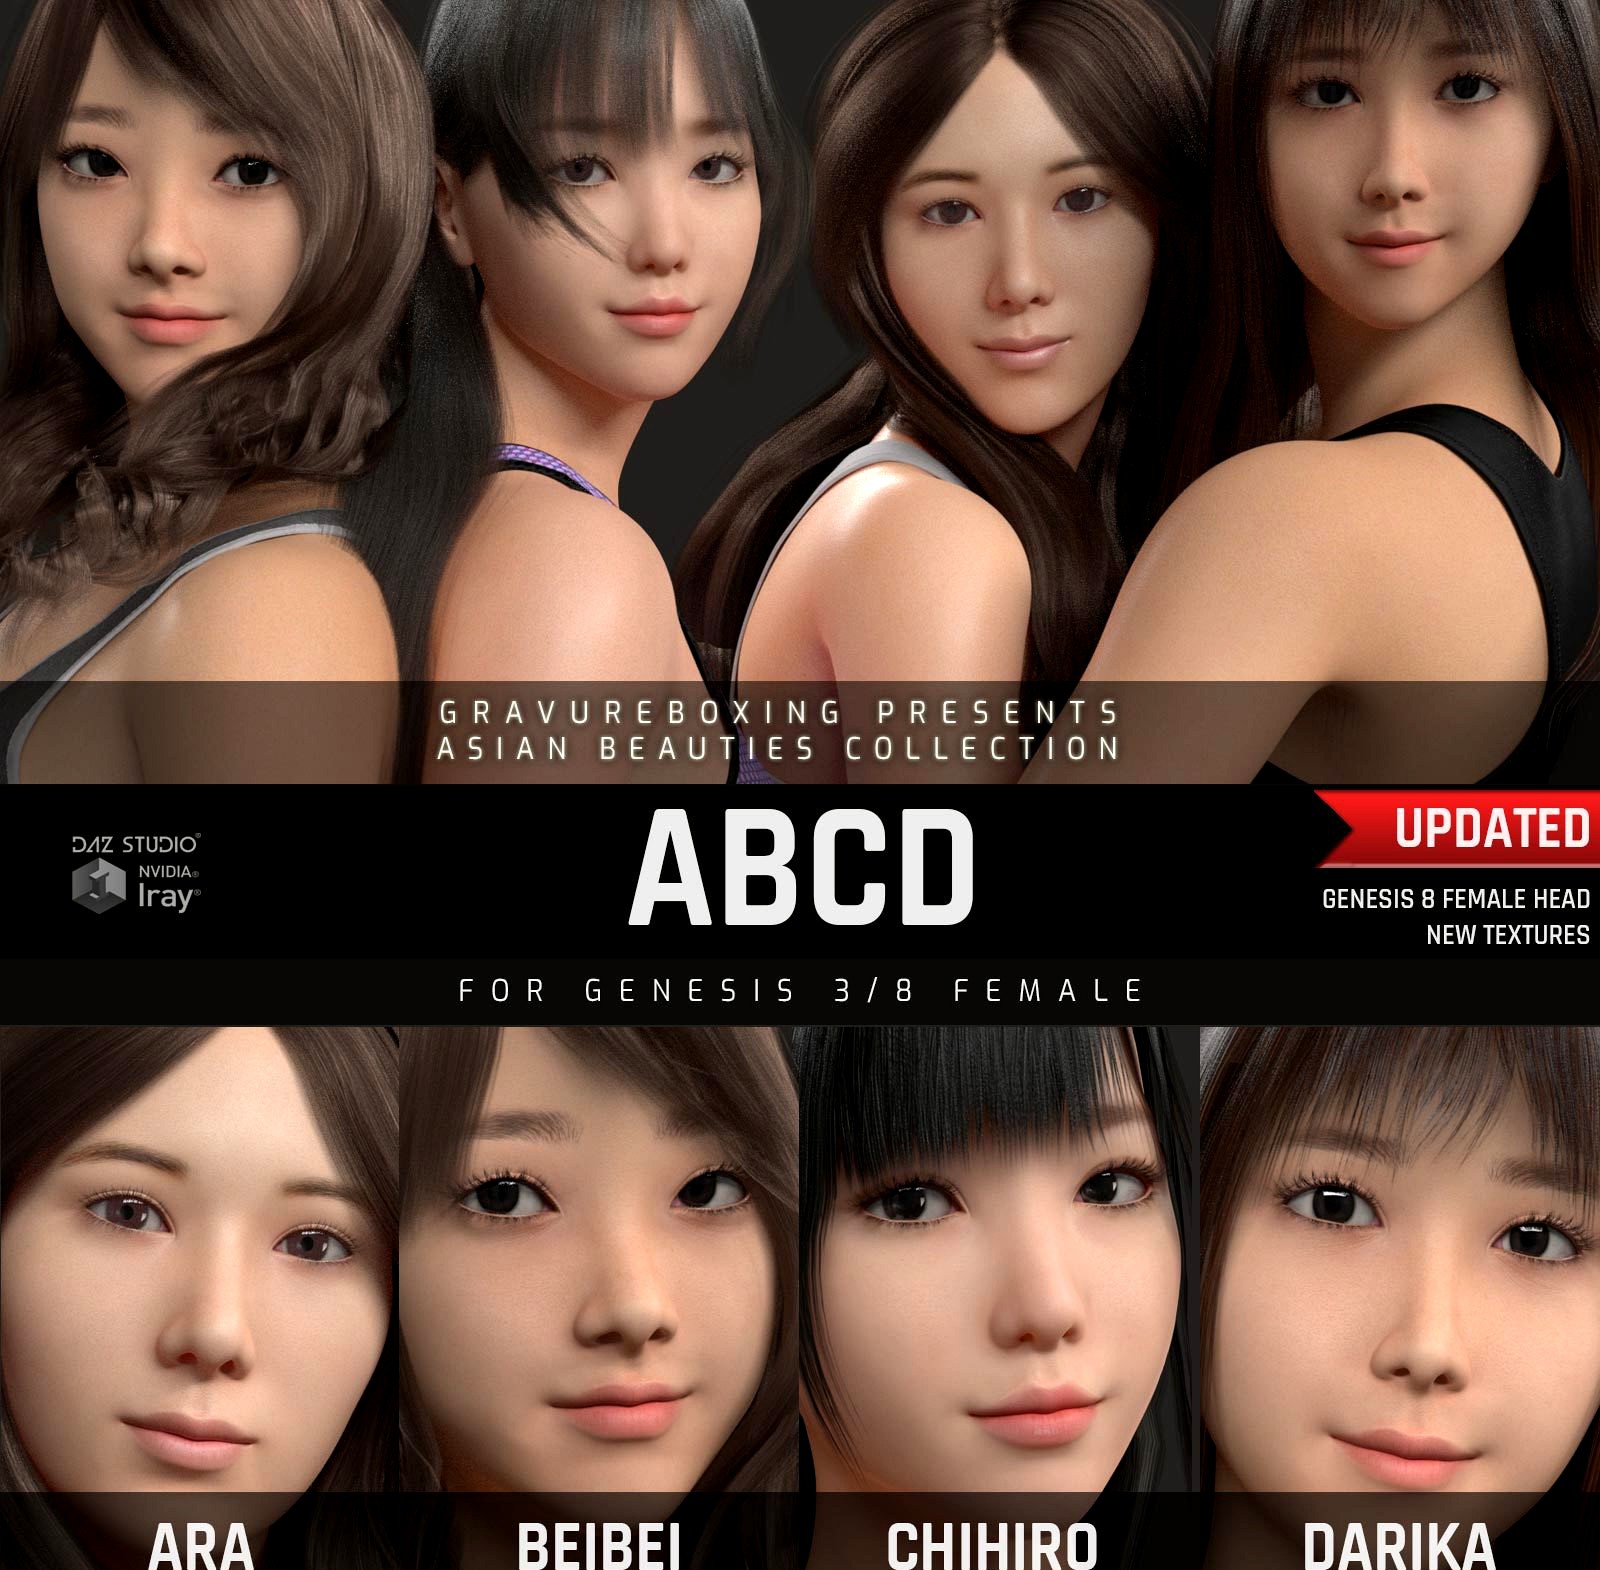 BUNDLE Asian Beauties Collection ABCD